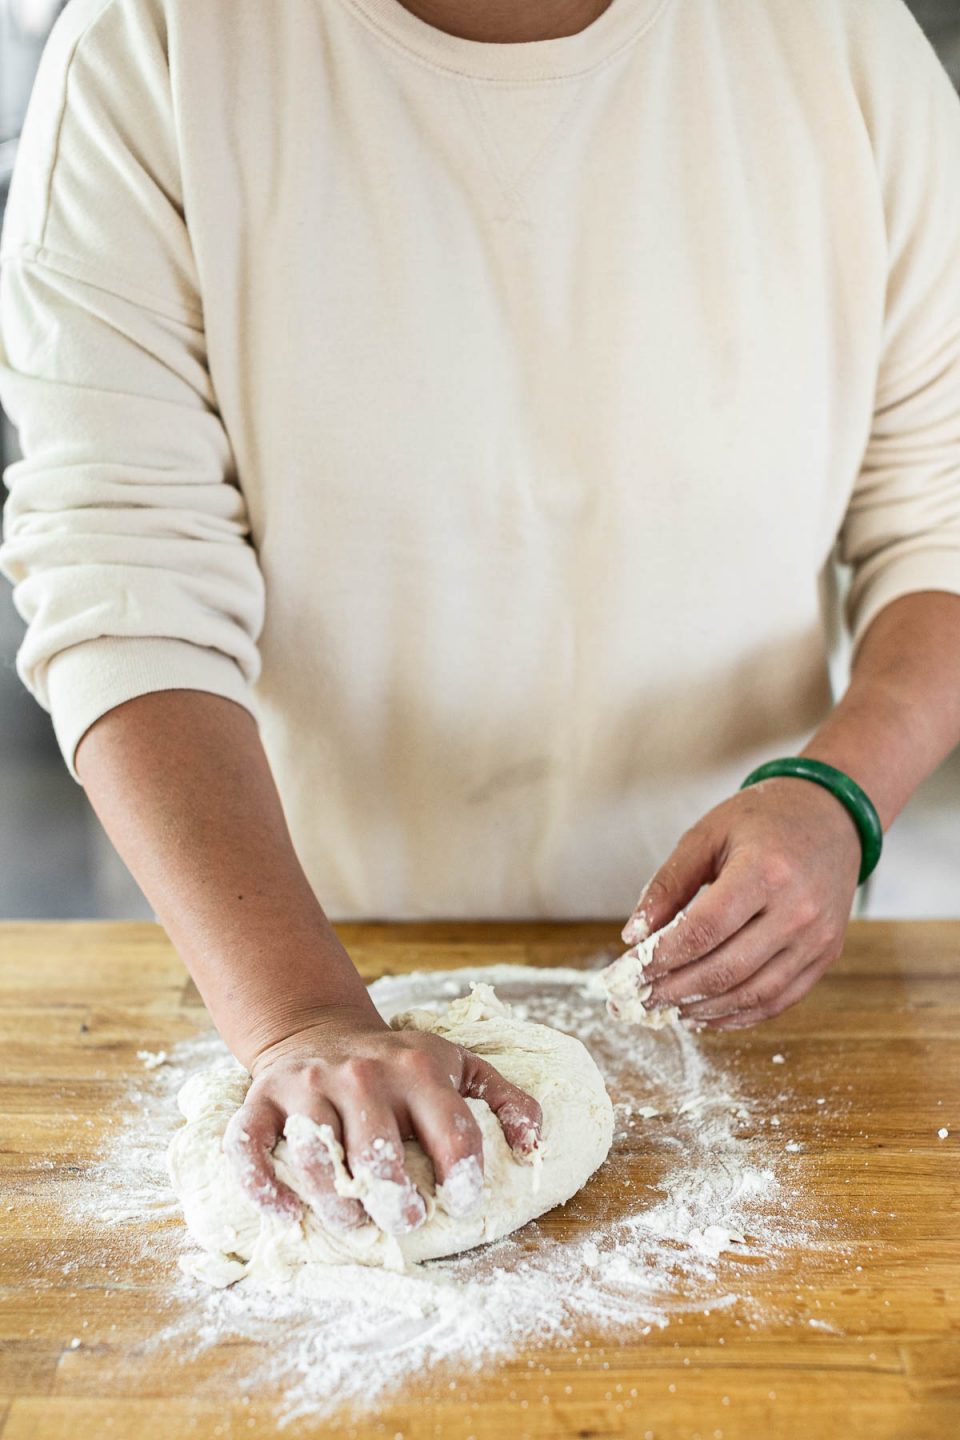 Mixing DeLallo Pizza Dough Kit: Jess, shown in a white sweatshirt, stands behind a butcher block counter, kneading the pizza dough with her hands.